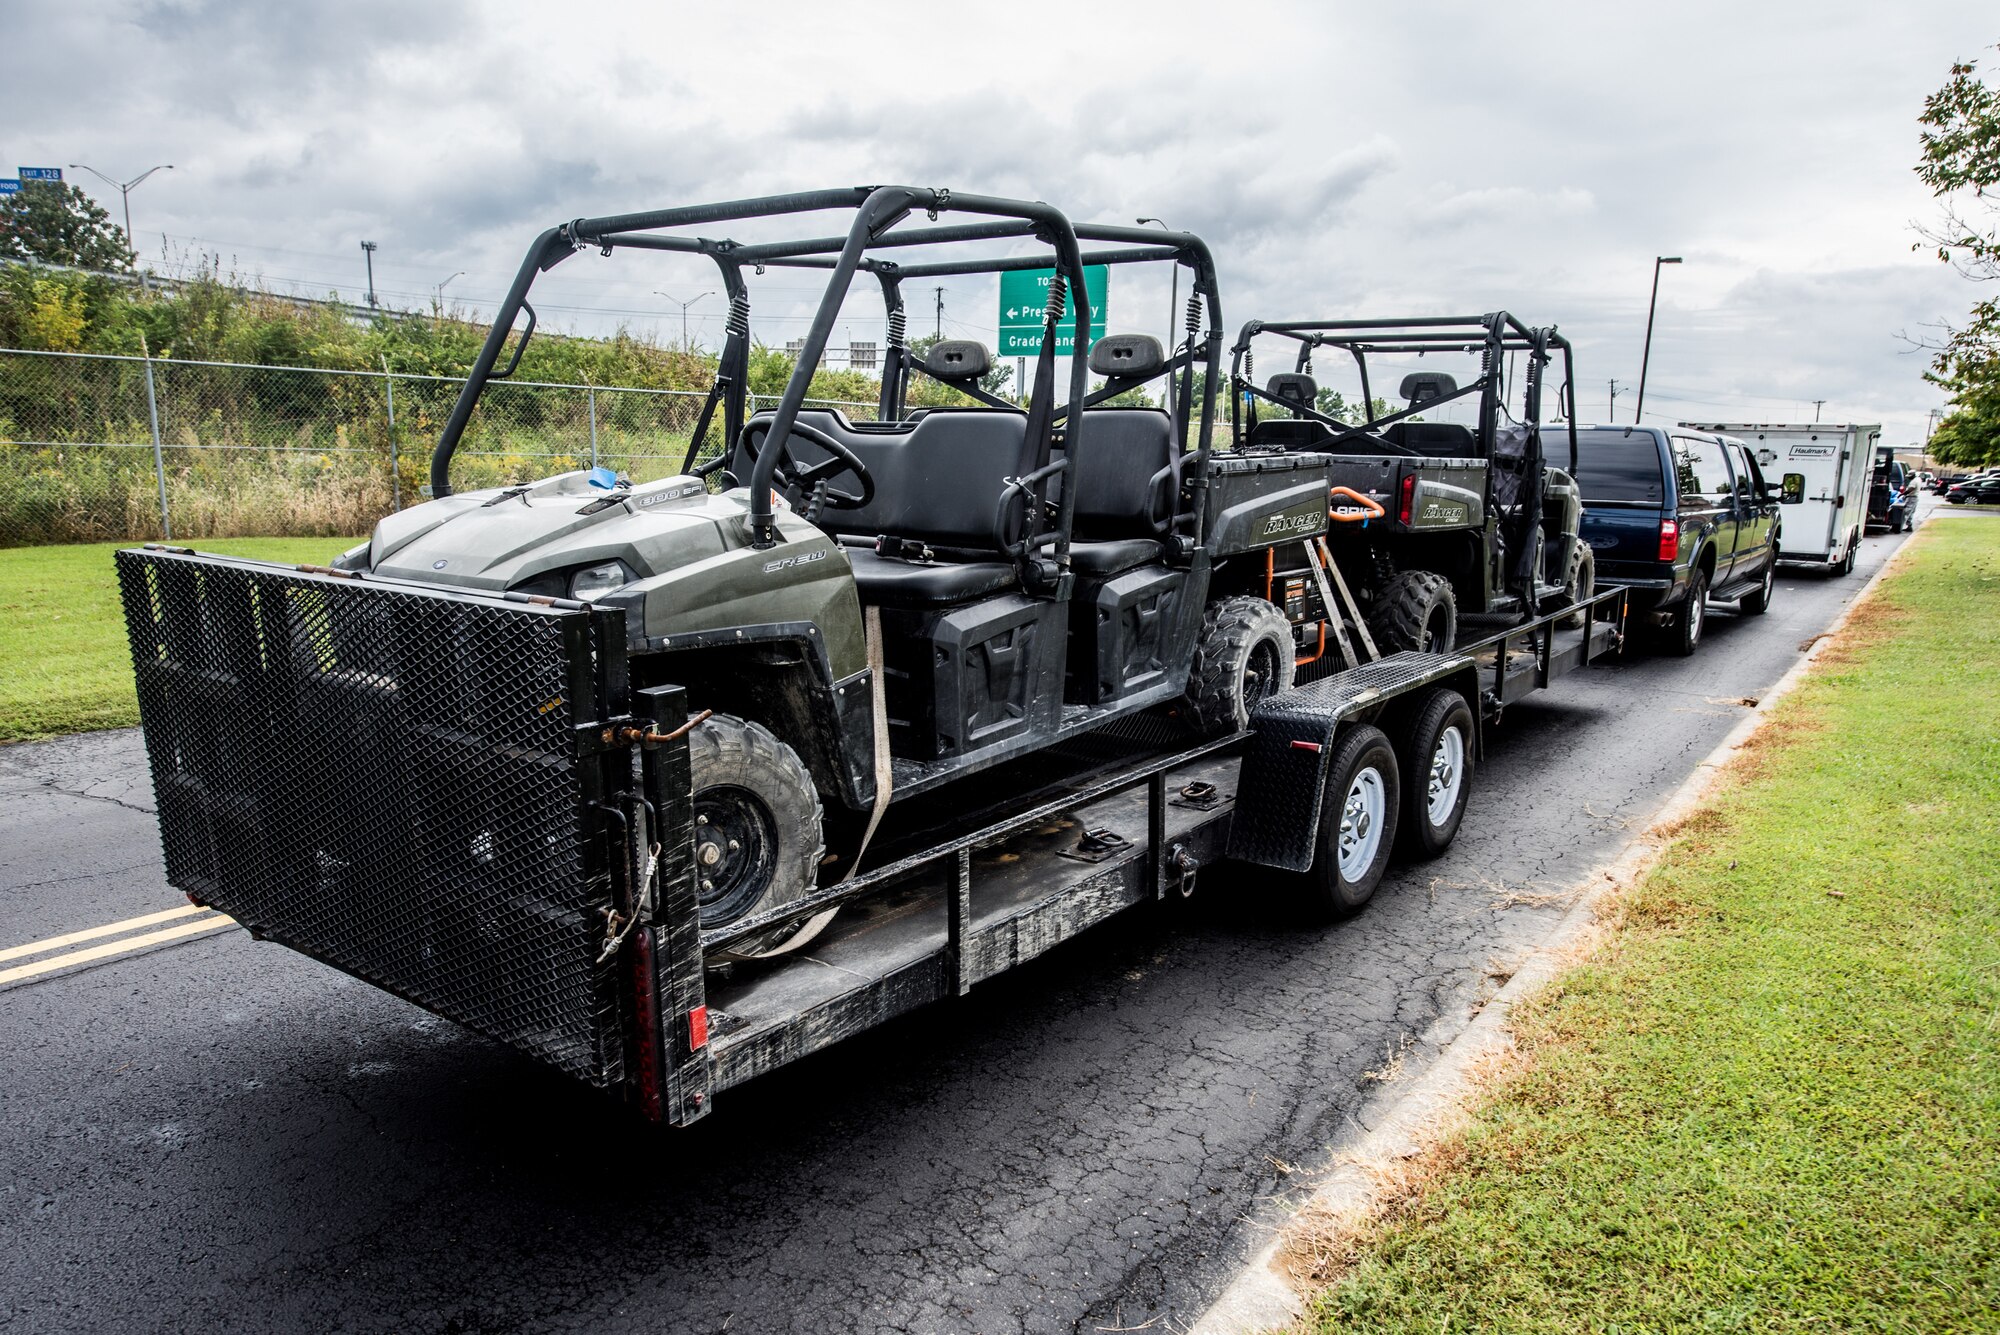 Equipment awaits deployment along with 11 members of the 123rd Airlift Wing’s Fatality Search and Recovery Team at the Kentucky Air National Guard Base in Louisville, Ky., Sept. 17, 2018. The team, which specializes in the dignified recovery of deceased personnel, is deploying to North Carolina to assist the medical examiner’s office in the wake of Hurricane Florence.